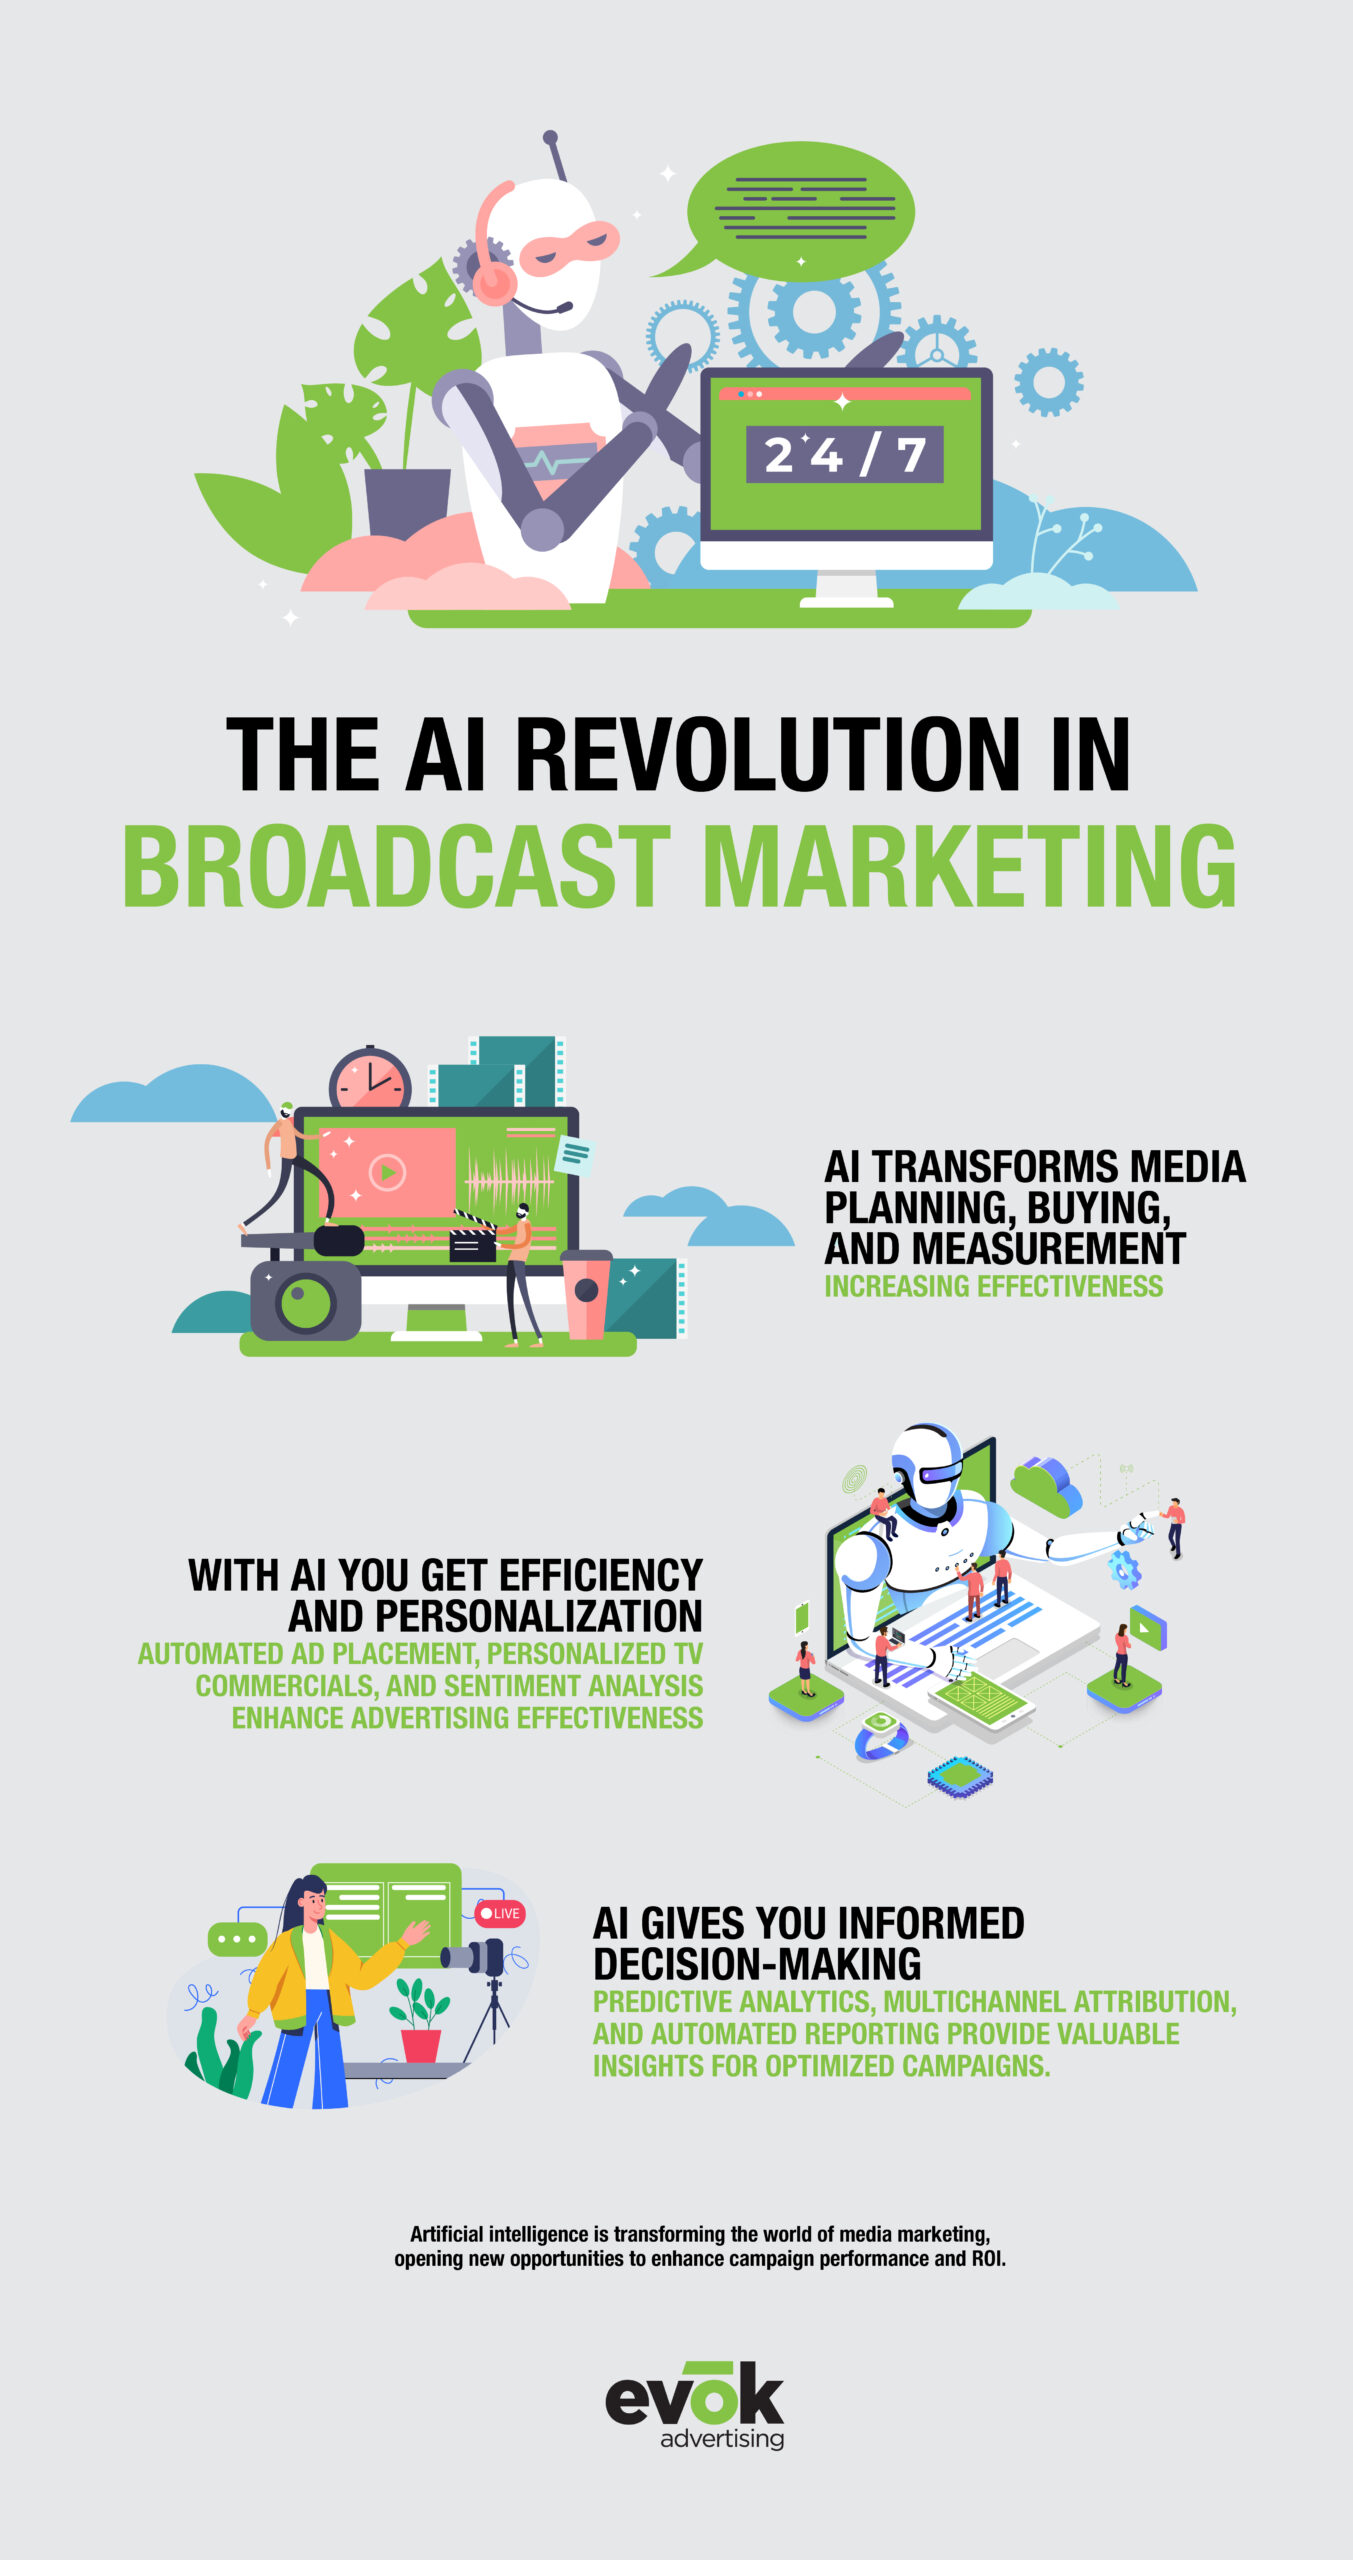 How AI Affects Broadcasting Media Marketing